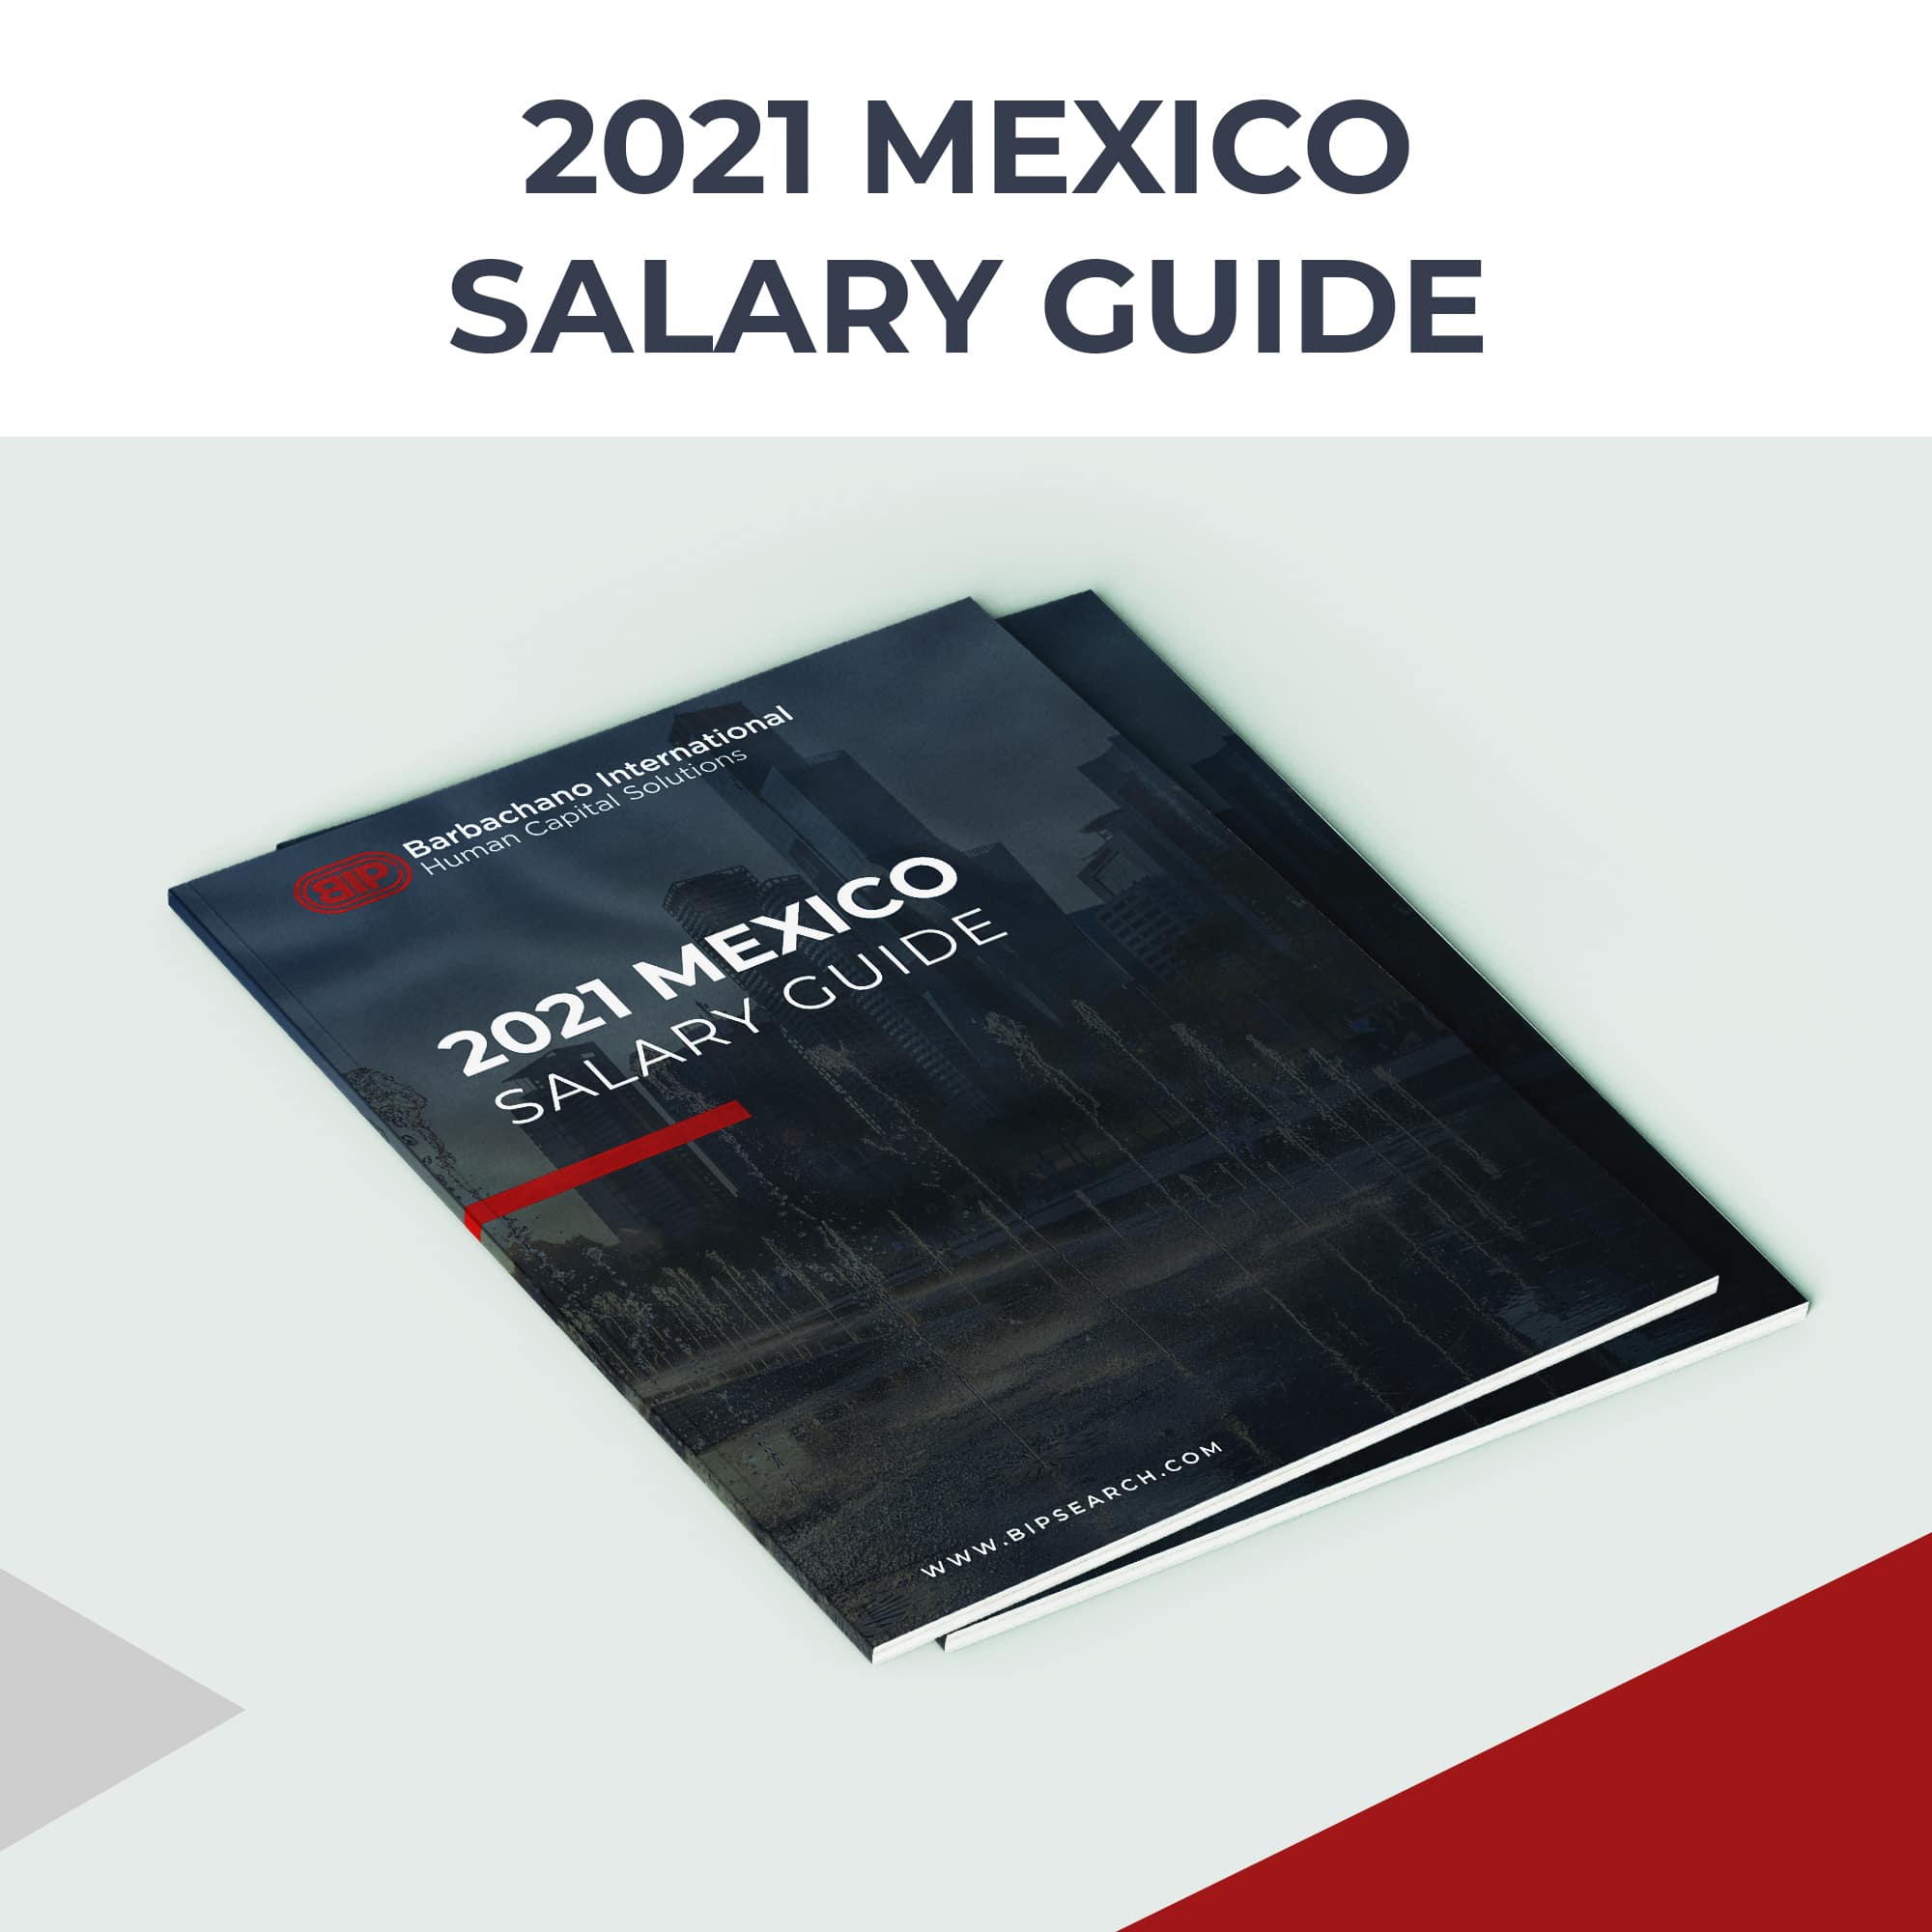 2021 Mexico Salary Guide